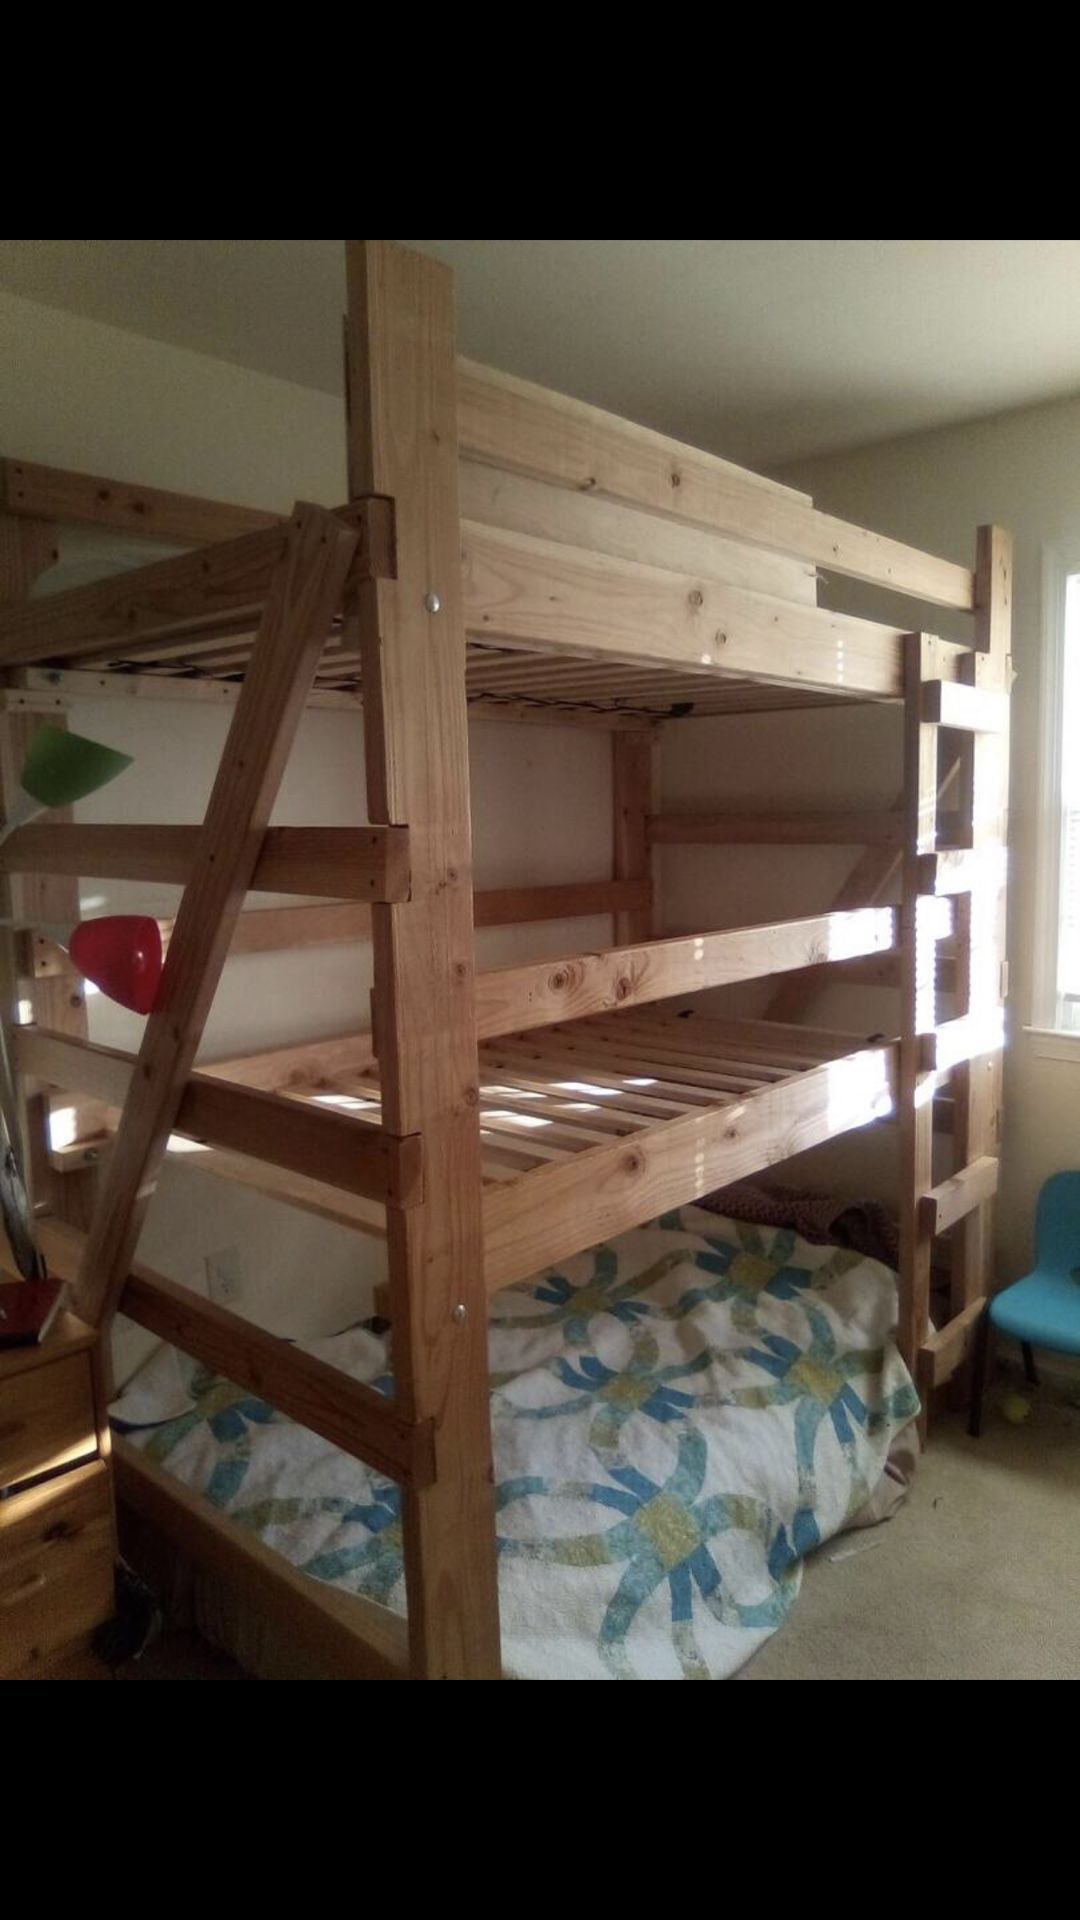 Triple bunk bed for 3 kids bedding